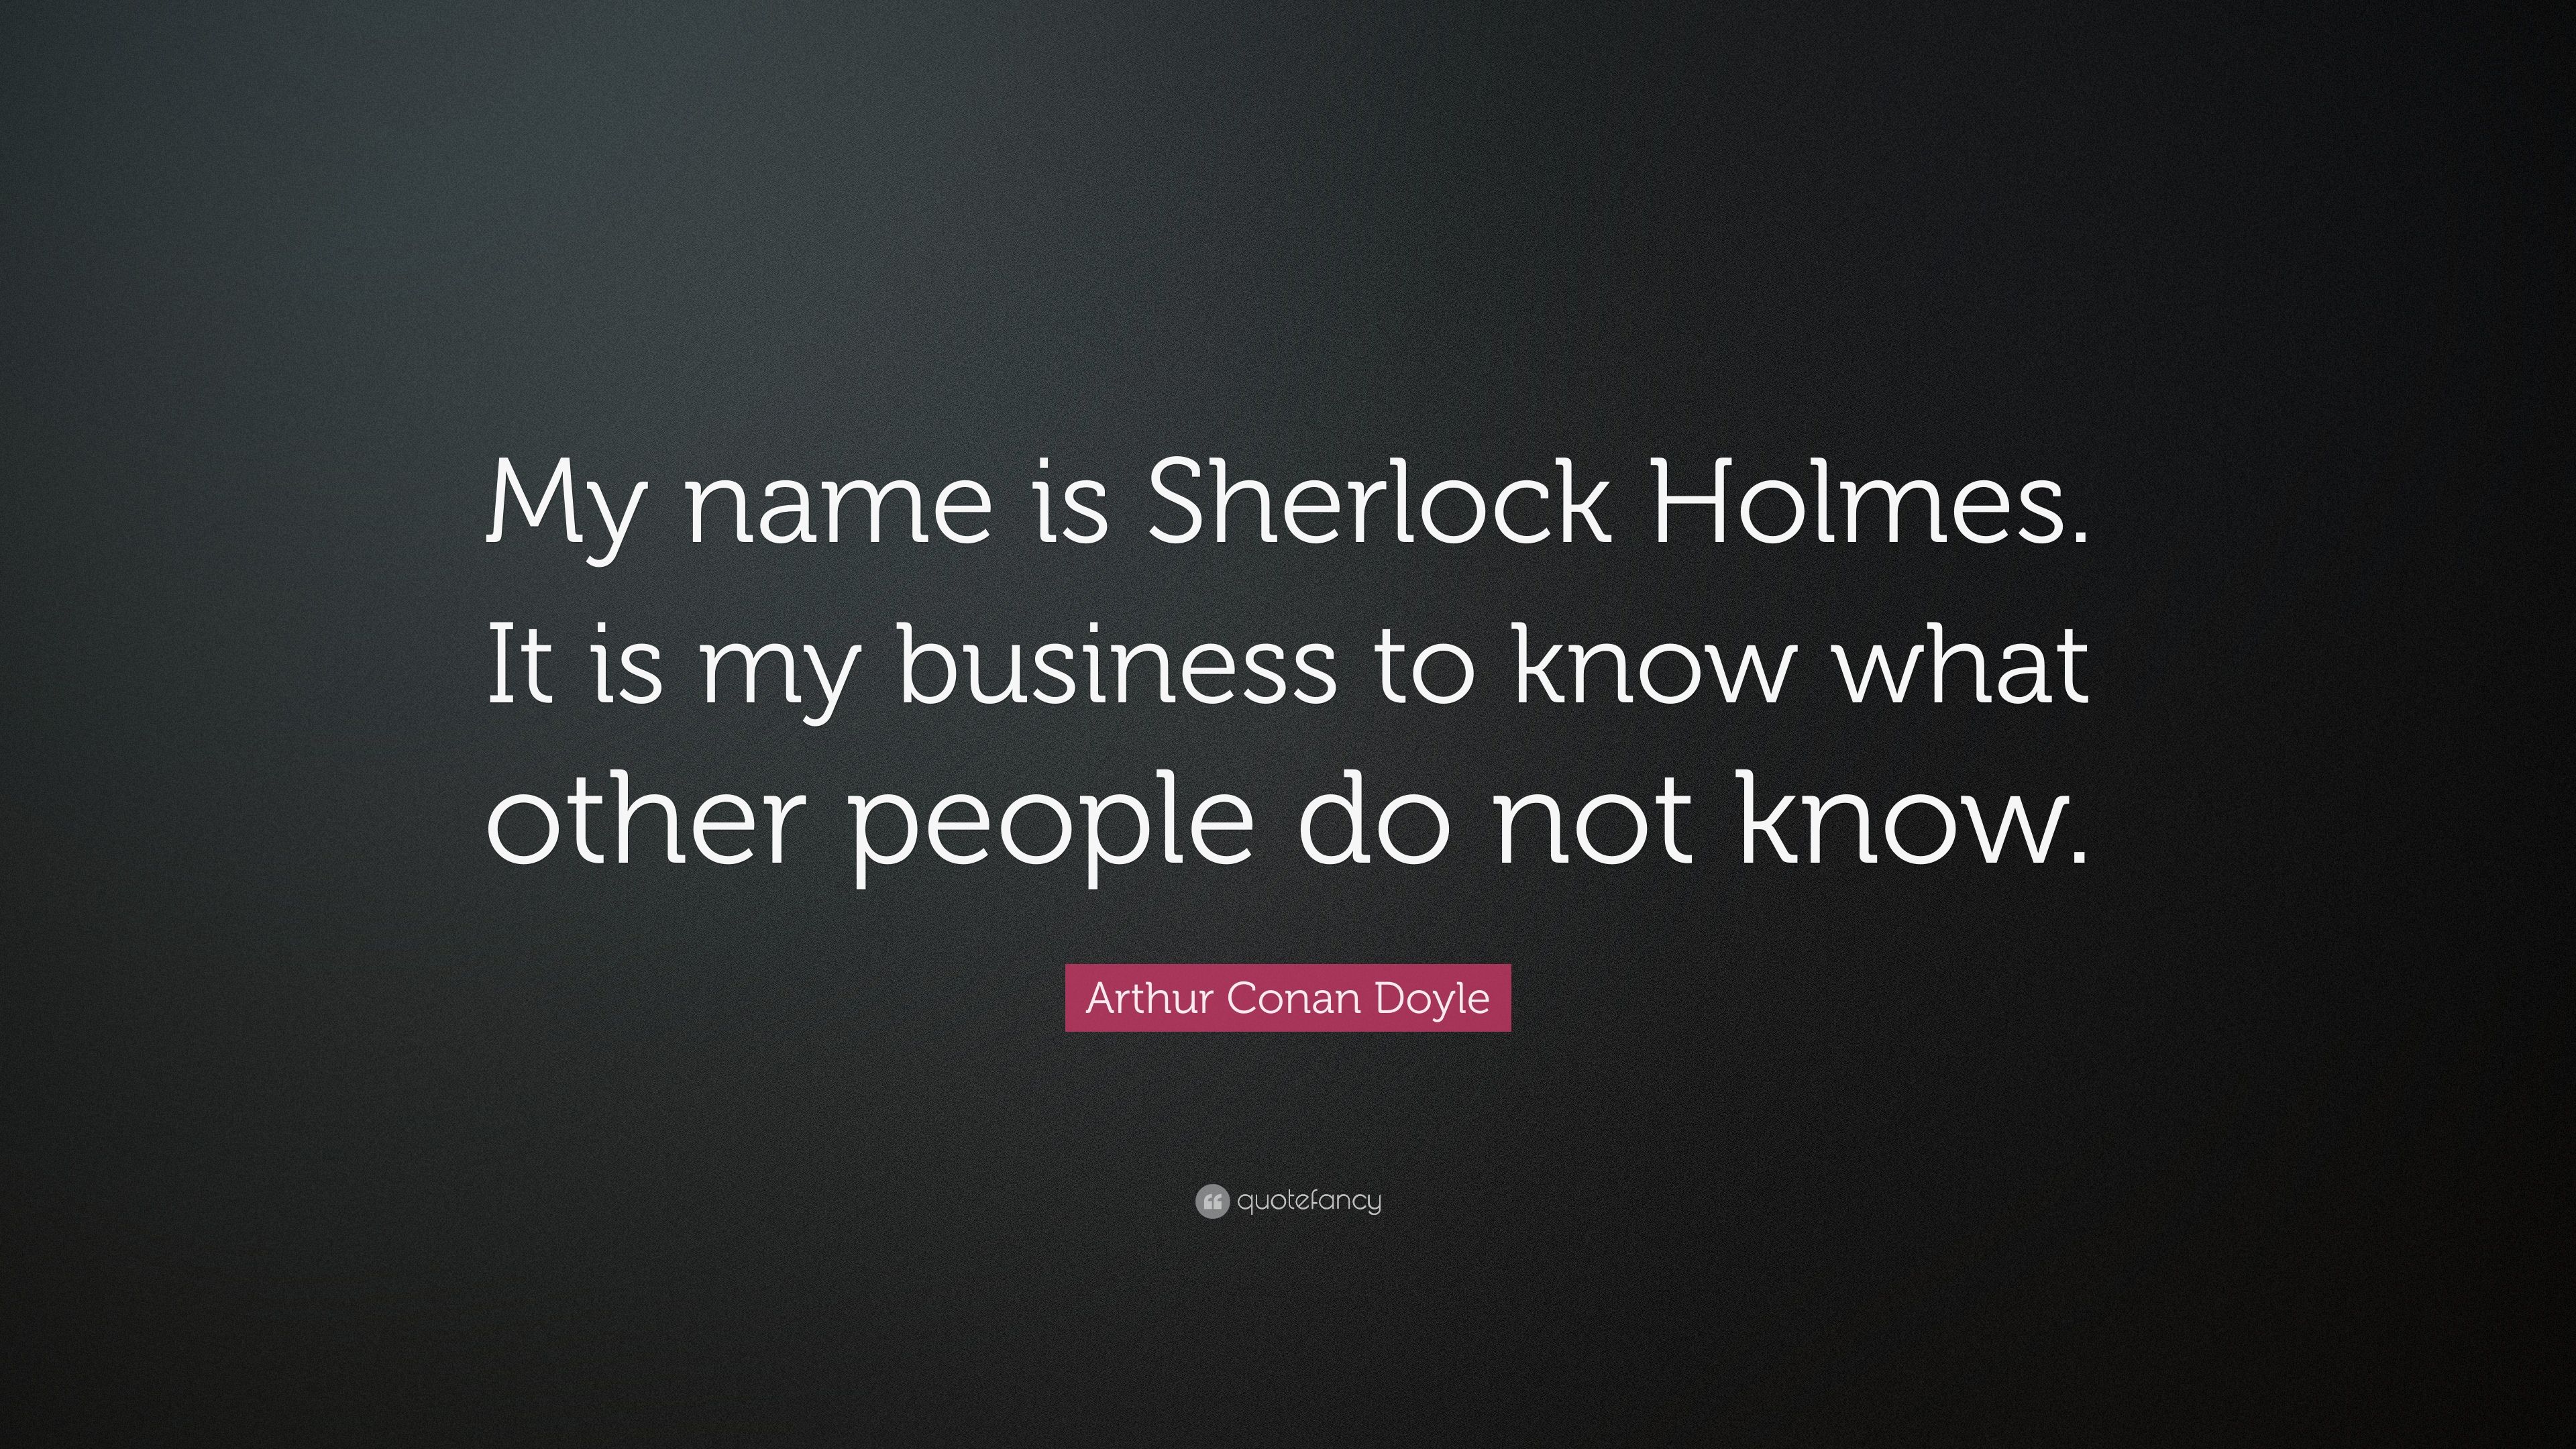 Arthur Conan Doyle Quote: “My name is Sherlock Holmes. It is my